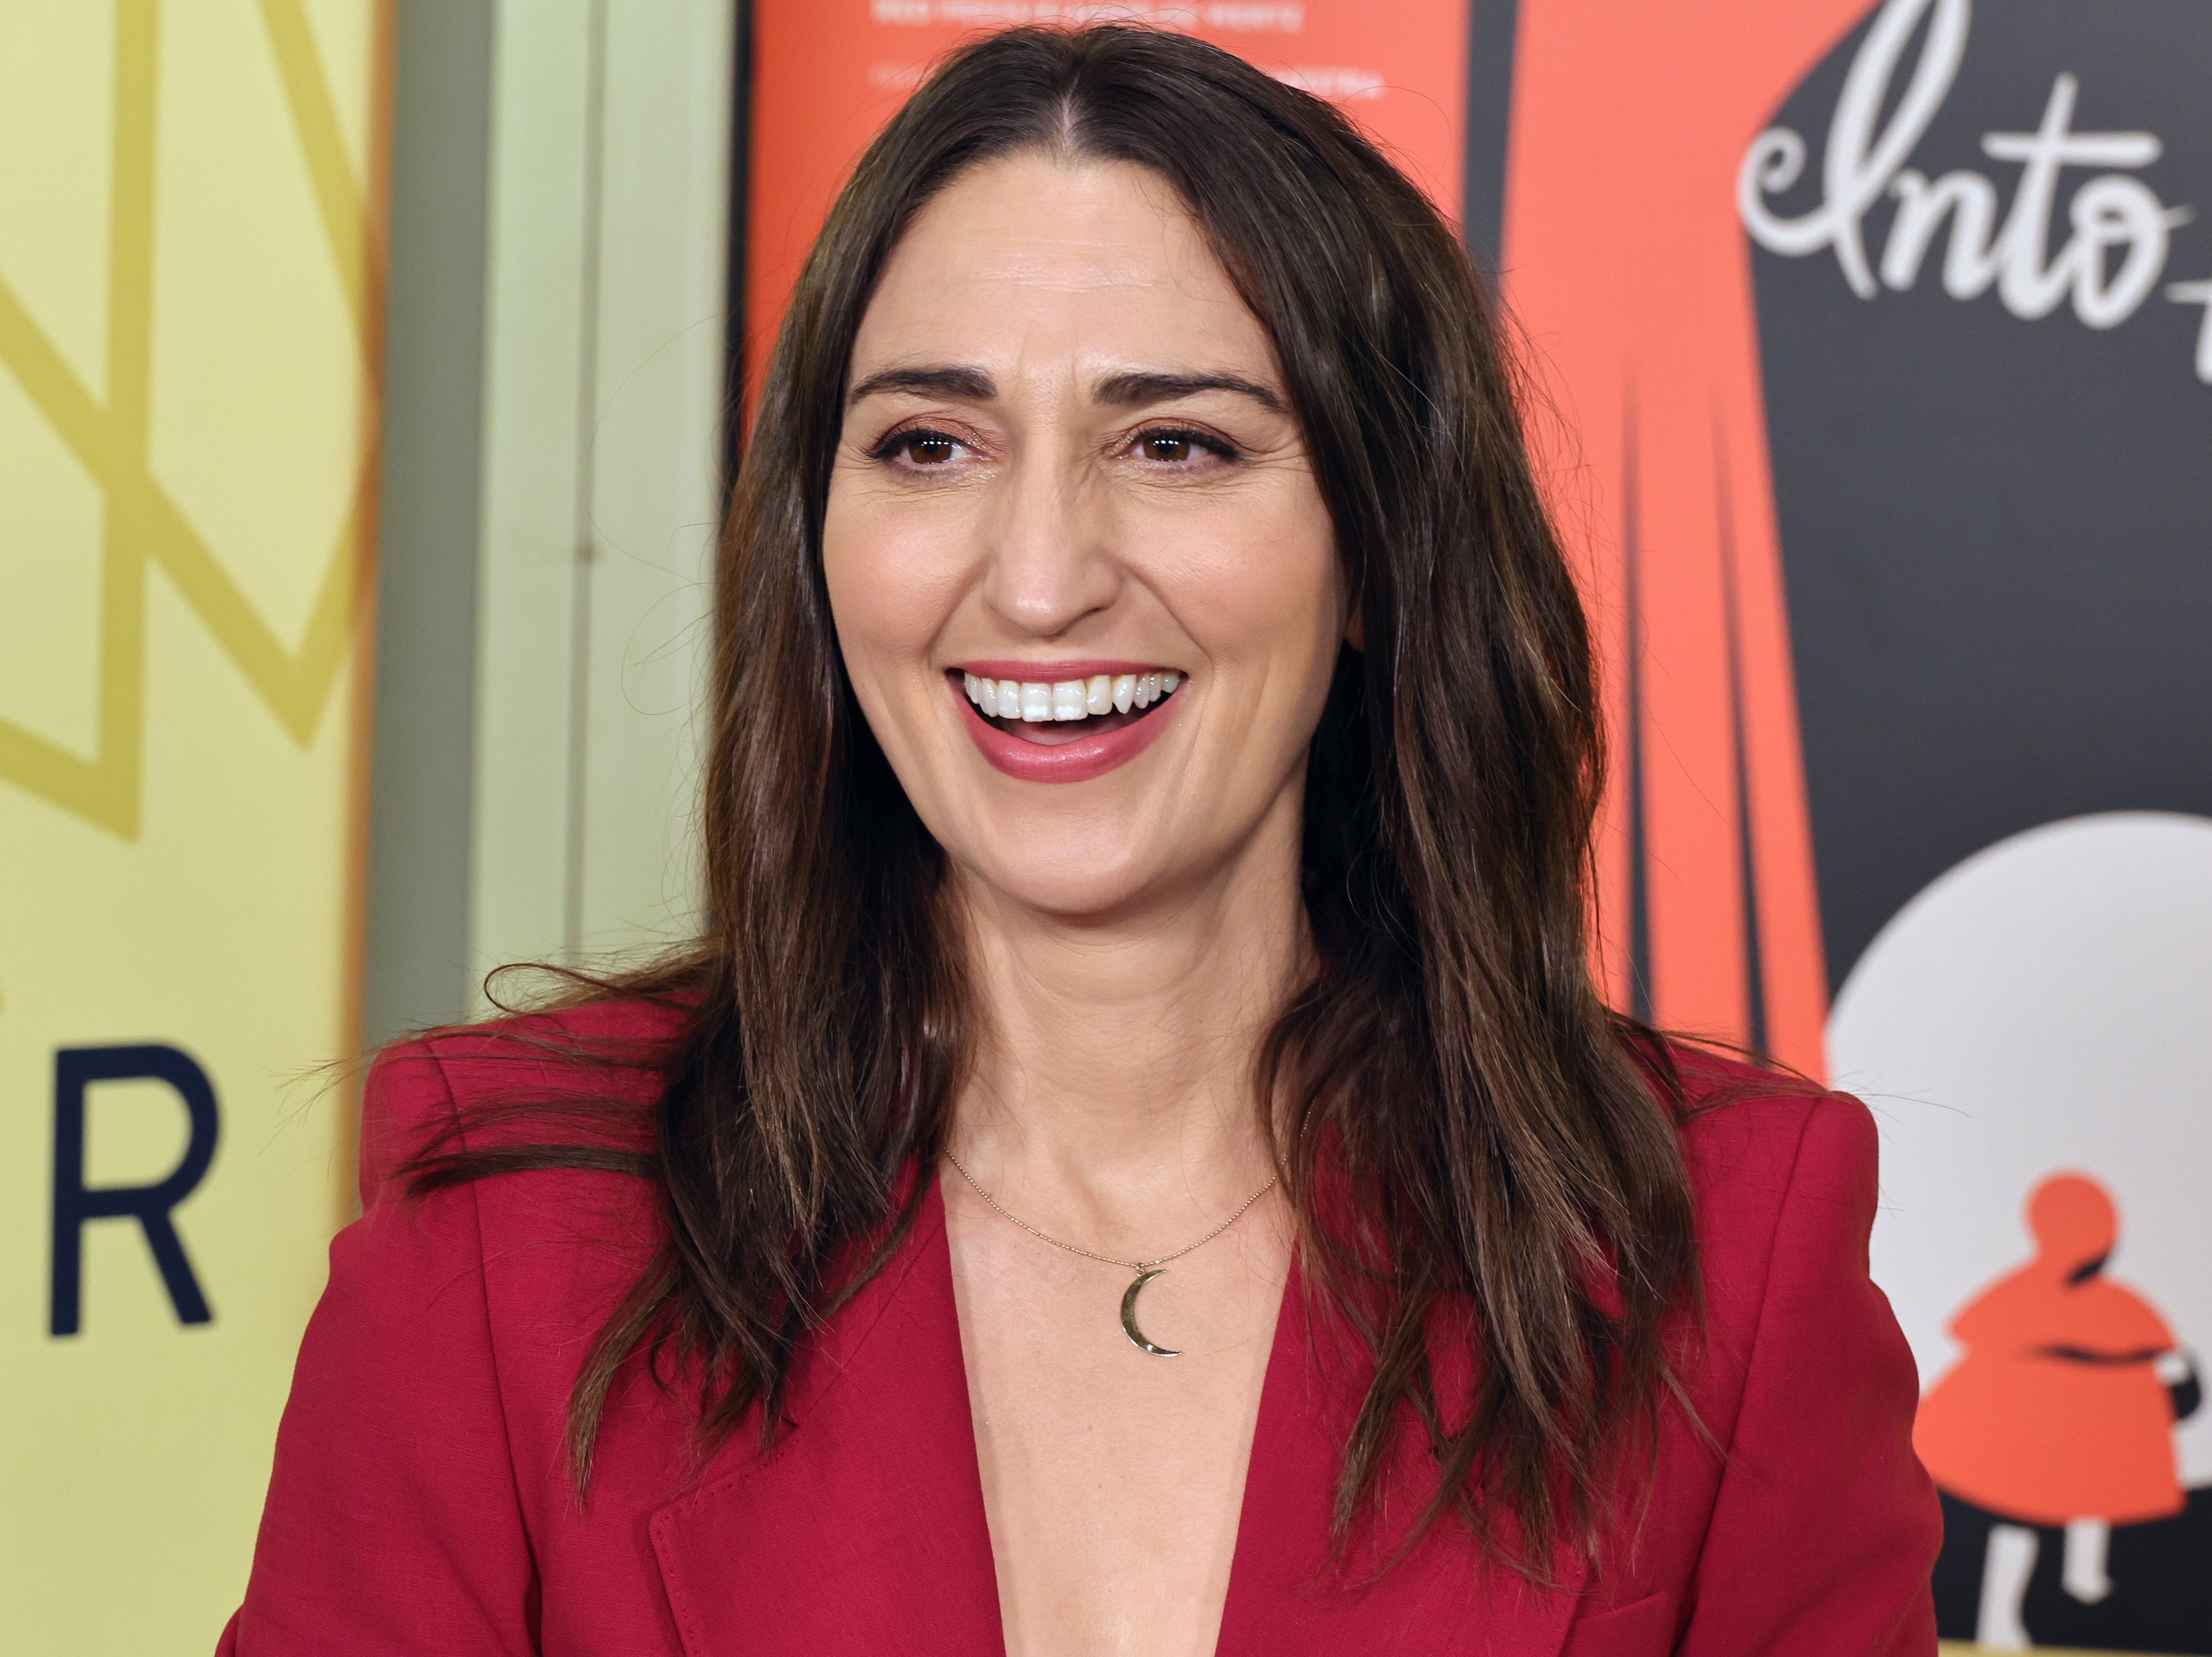 Bareilles began dating Joe Tippett after they met while working on the musical adaptation of Adrienne Shelly’s ‘Waitress’